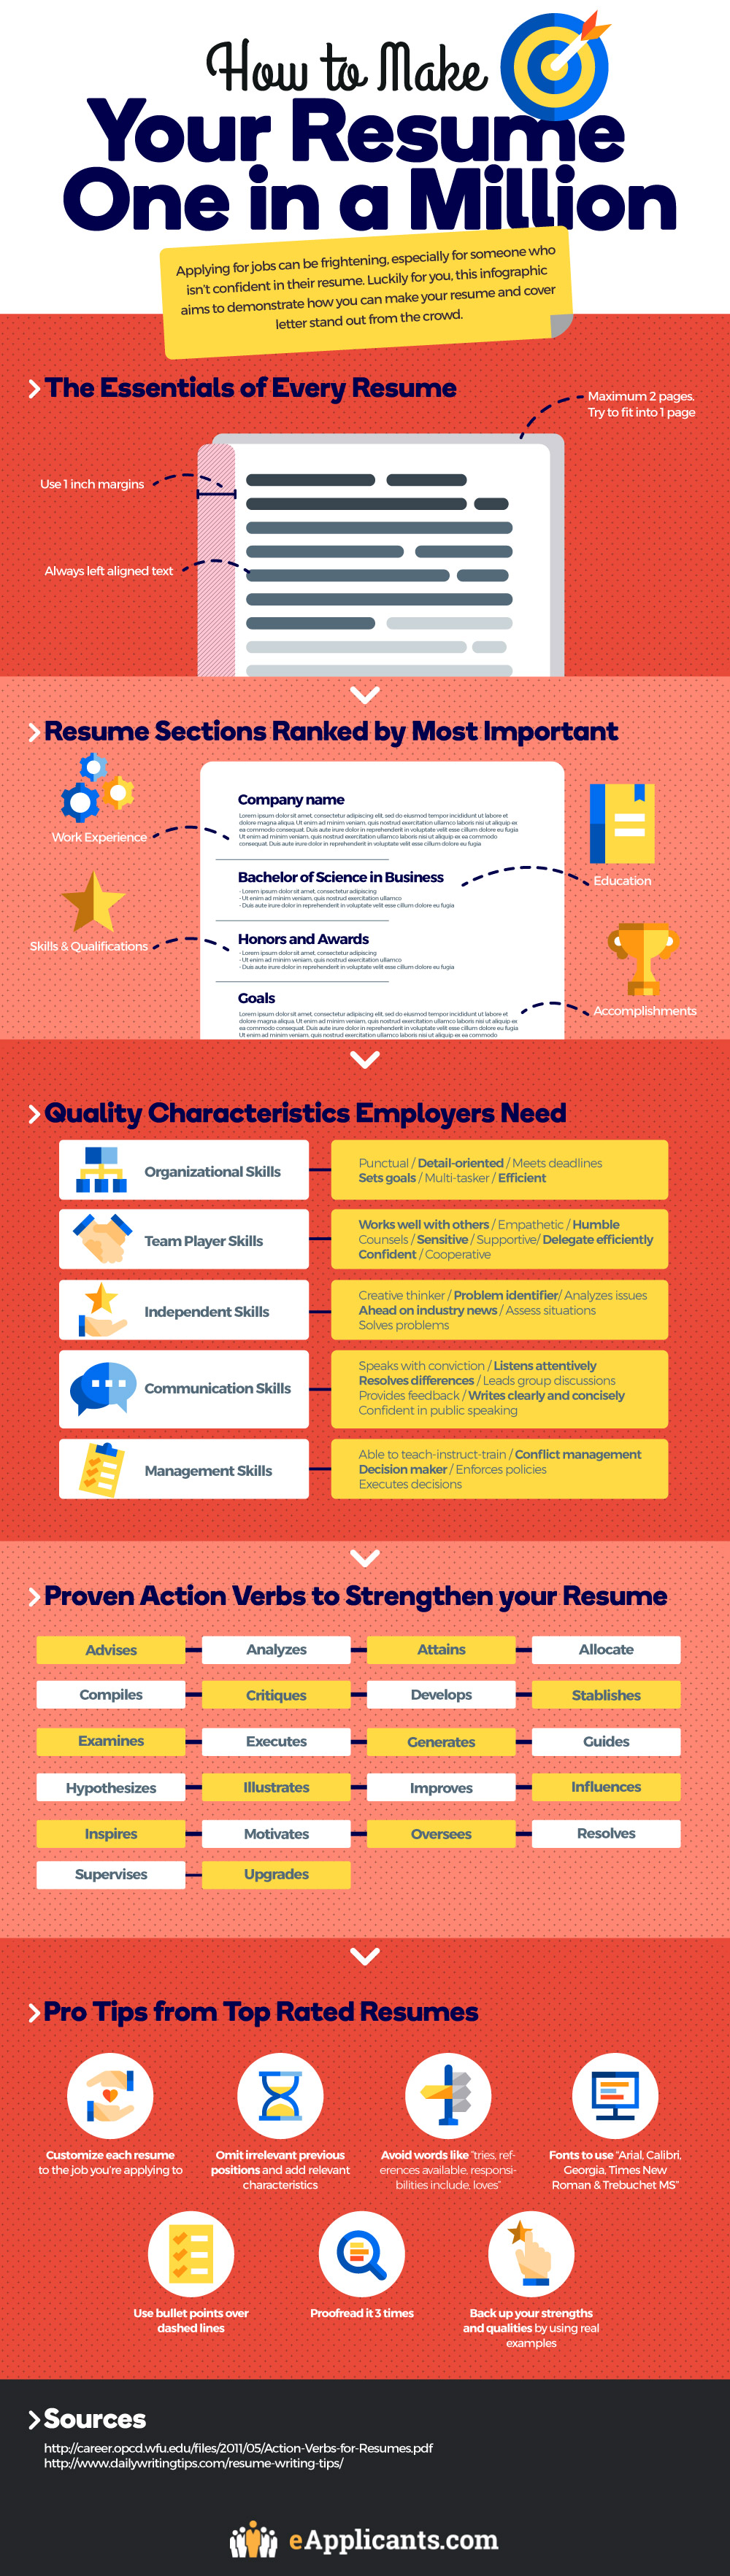 How To Punch Up Your Resume With ‘Action Verbs’ [Infographic]